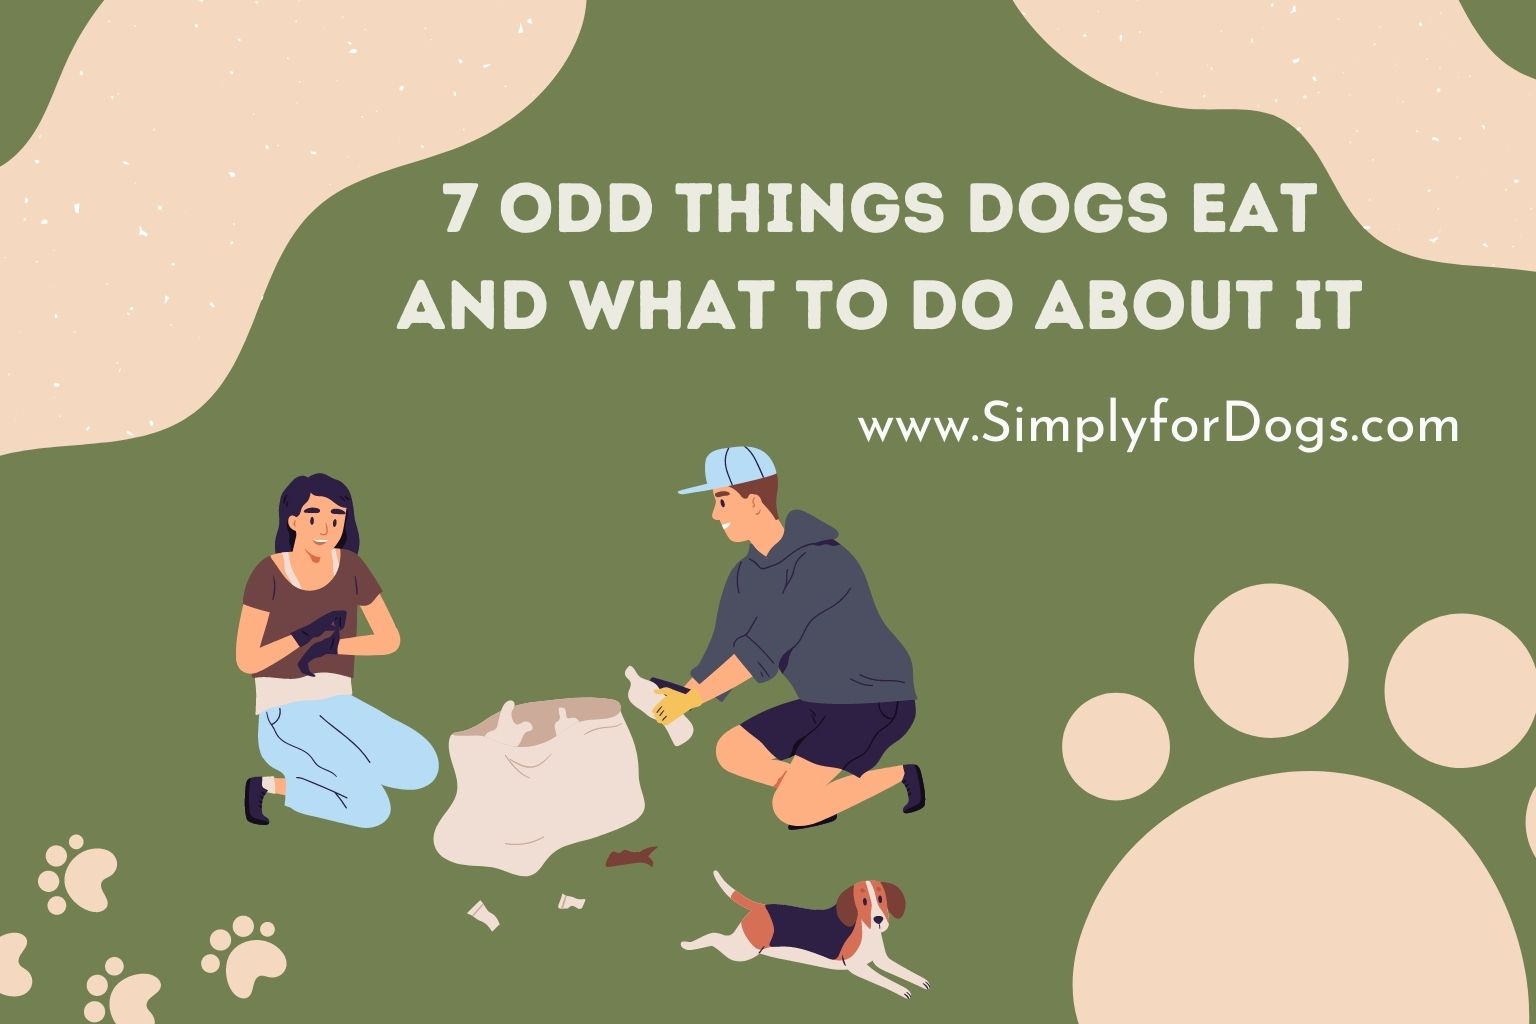 7 Odd Things Dogs Eat and What to Do About It